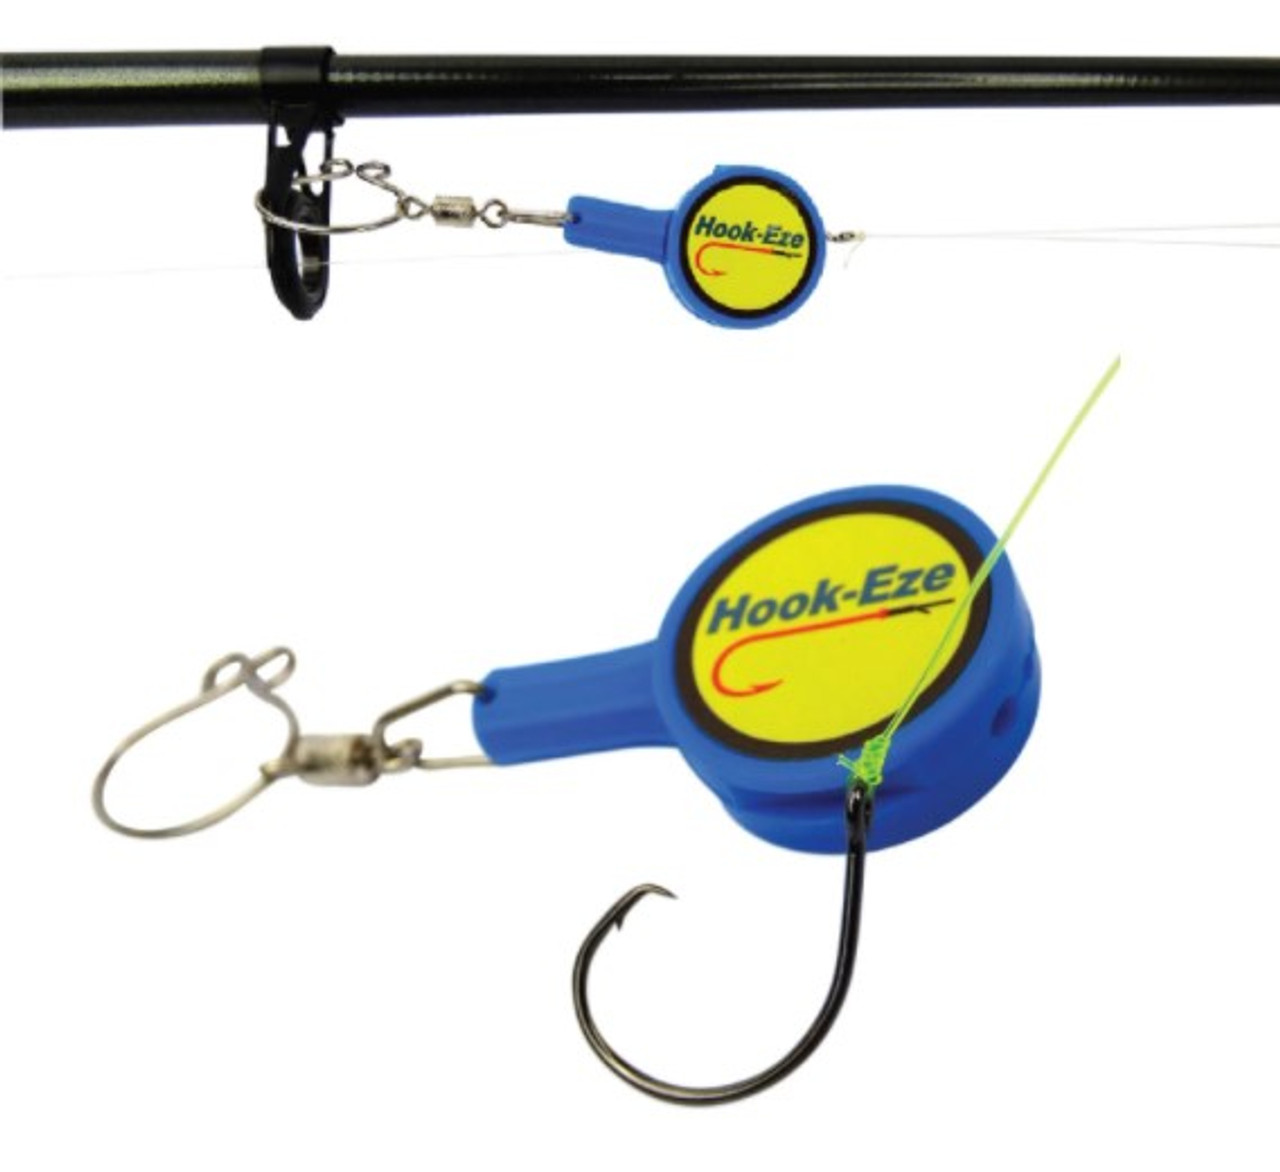 HOOK-EZE Large Fishing Knot Tying Tool All in One | Line Cutter | Cover Hooks on Fishing Poles and Travel Safe